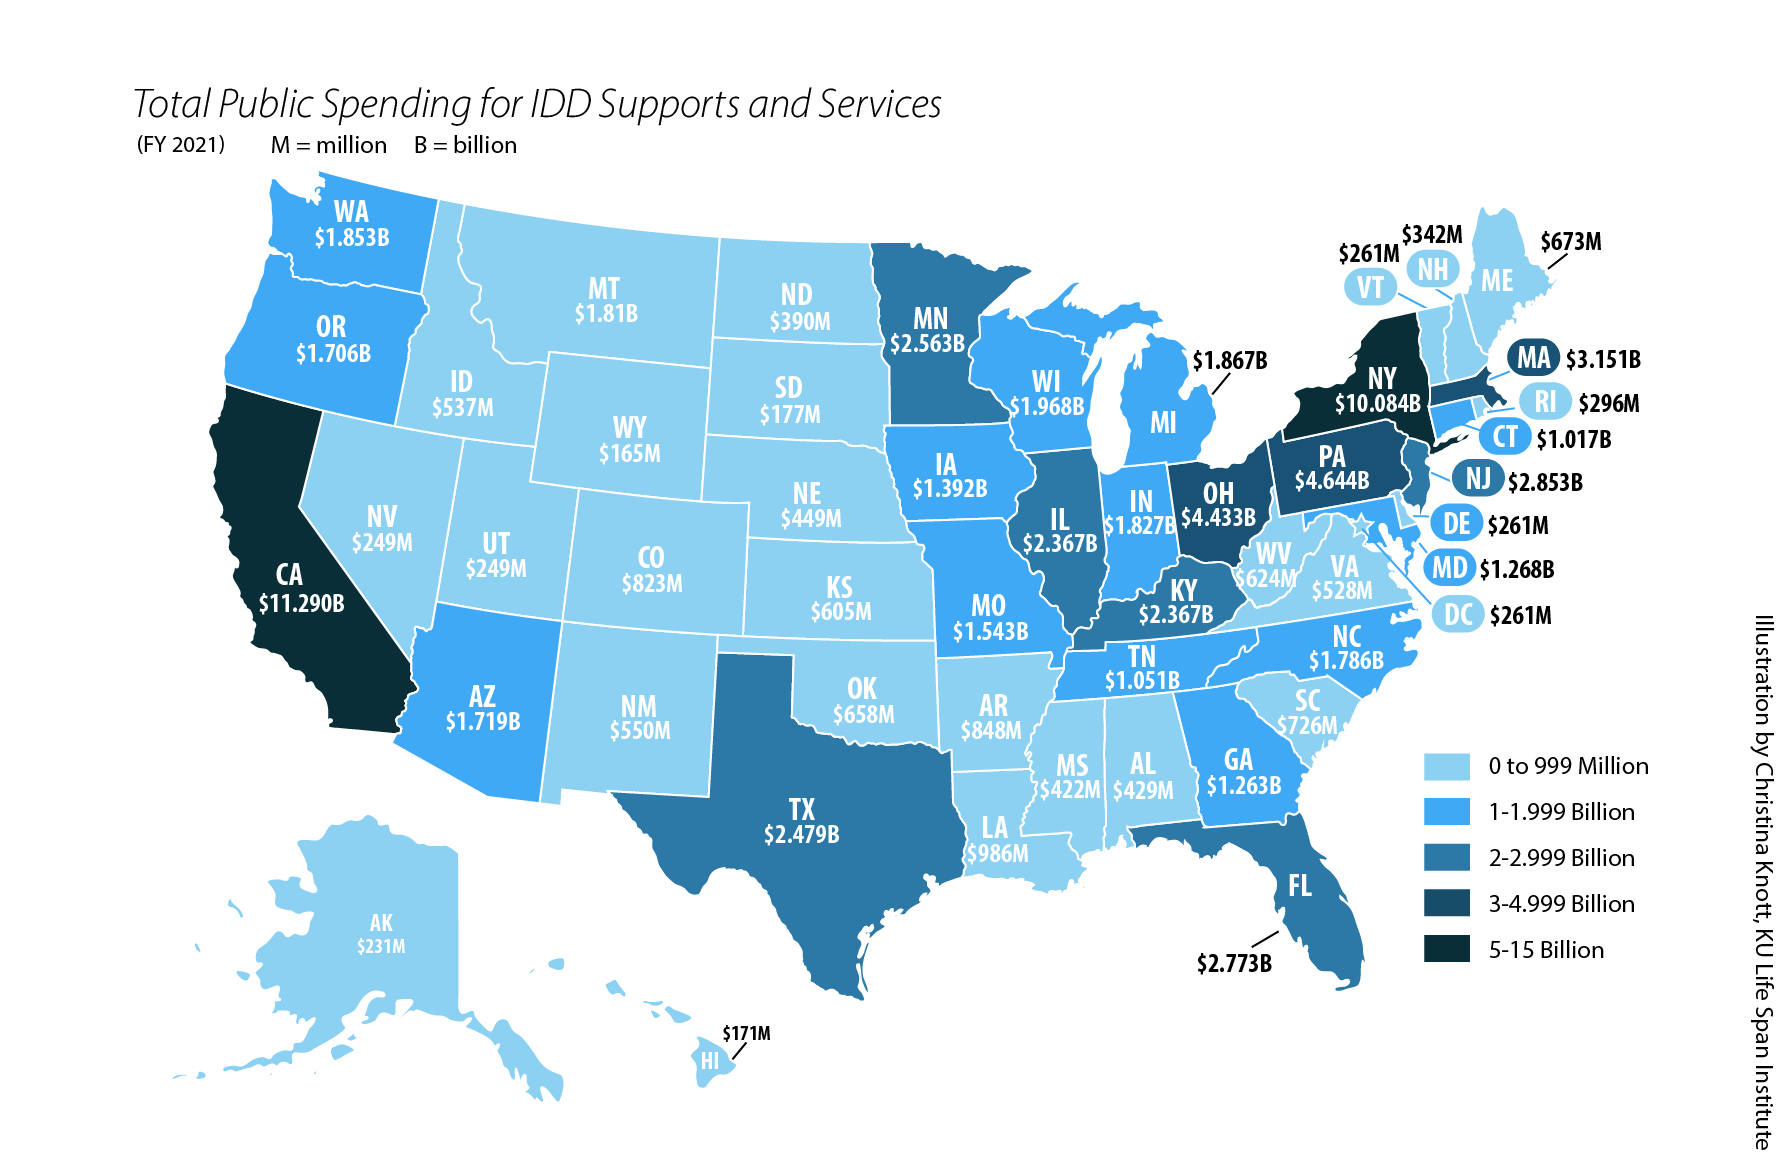 U.S. map showing total public spending for IDD supports and services